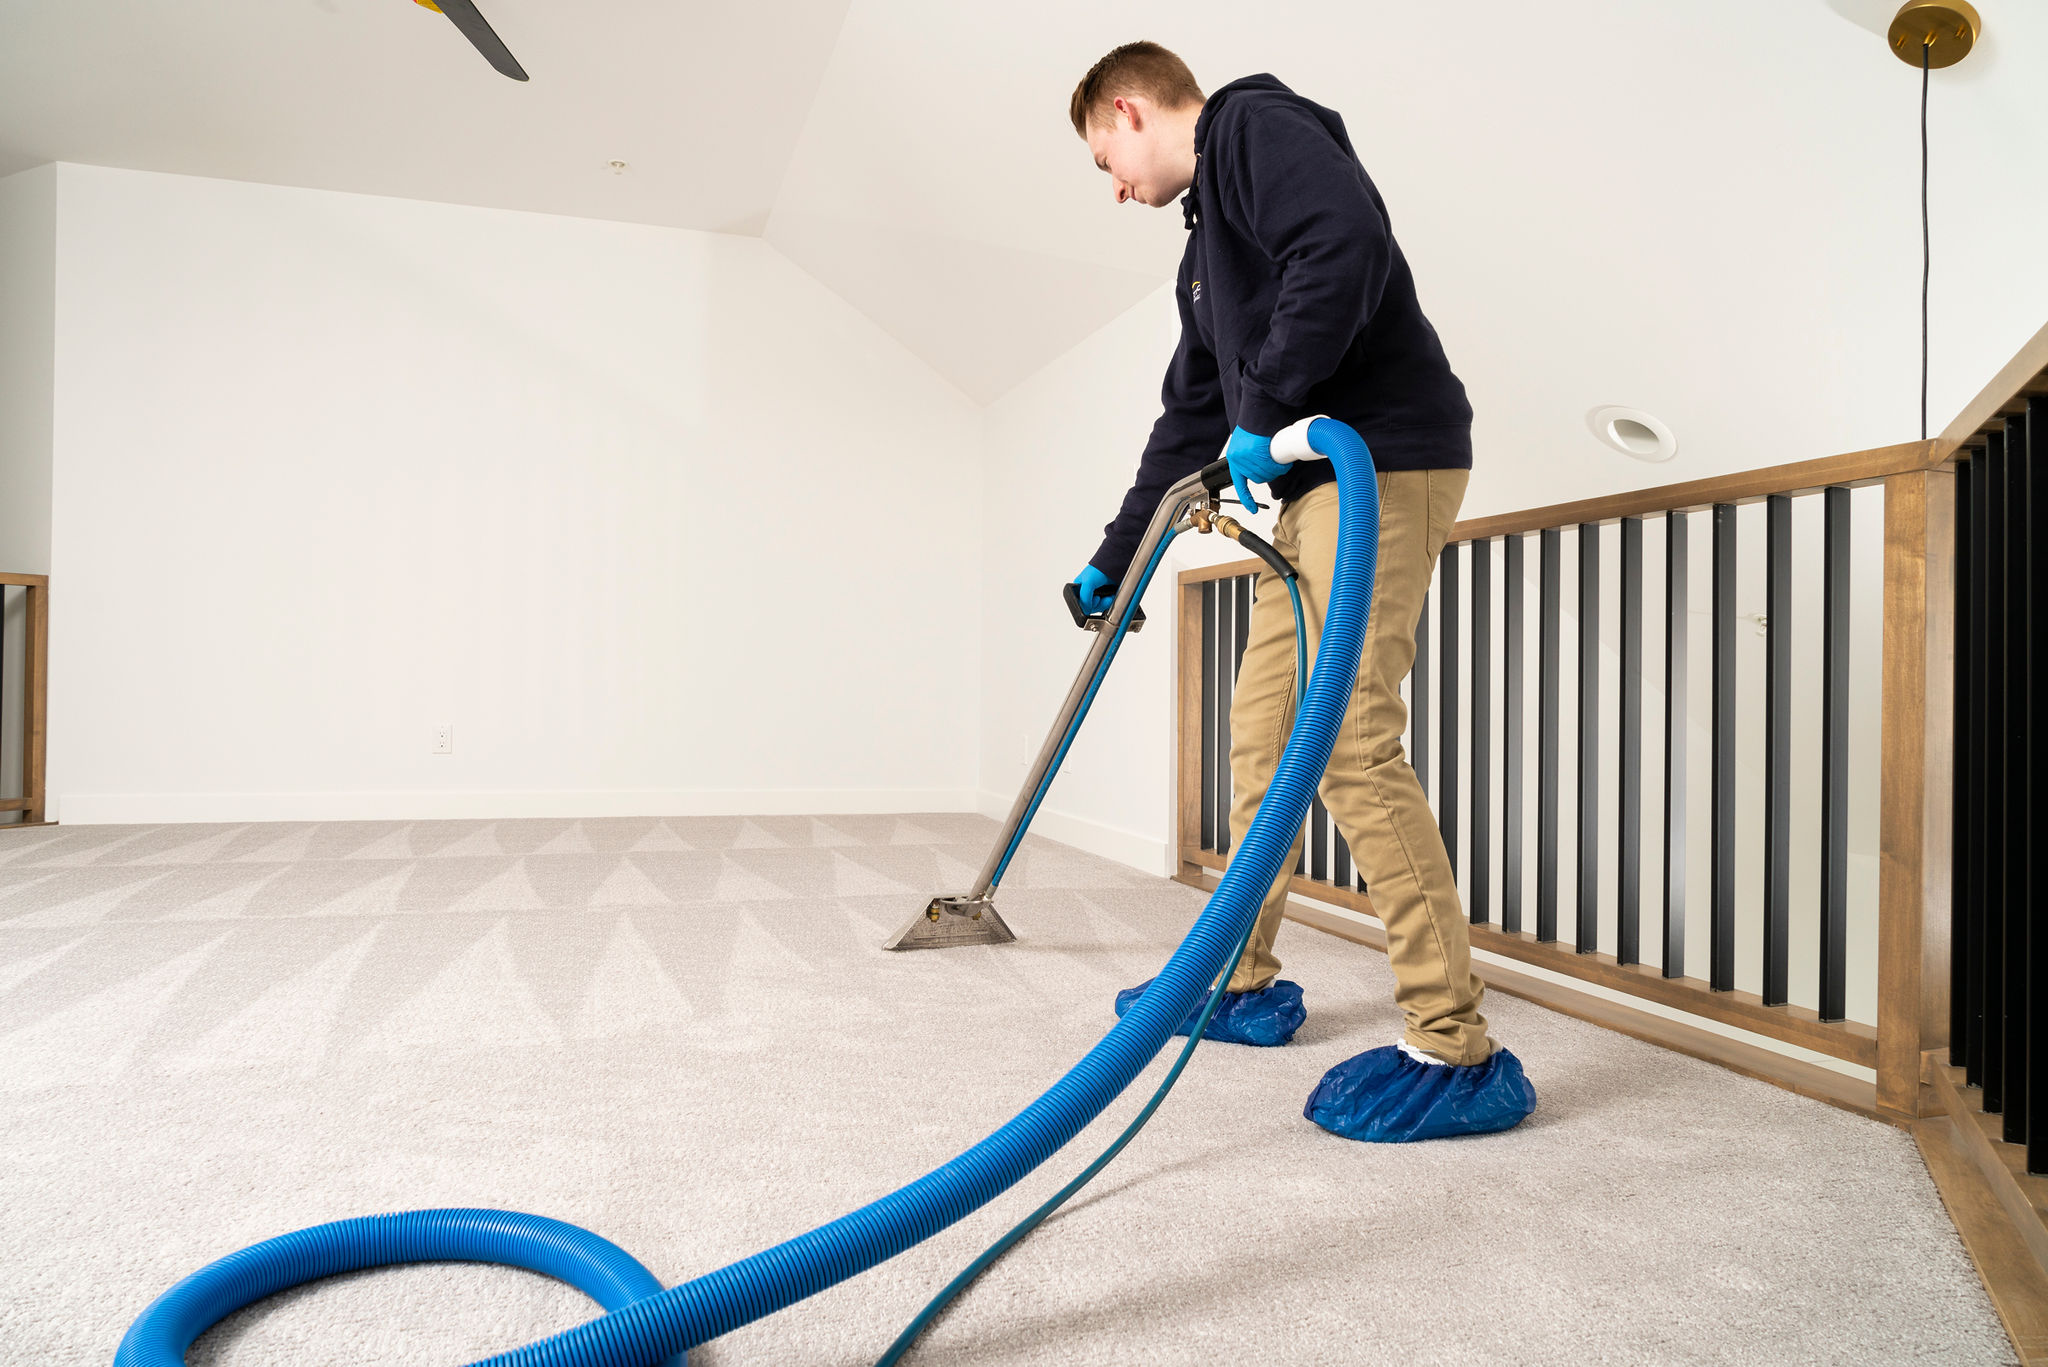 Break Your Myths Of Carpet Cleaning With Us